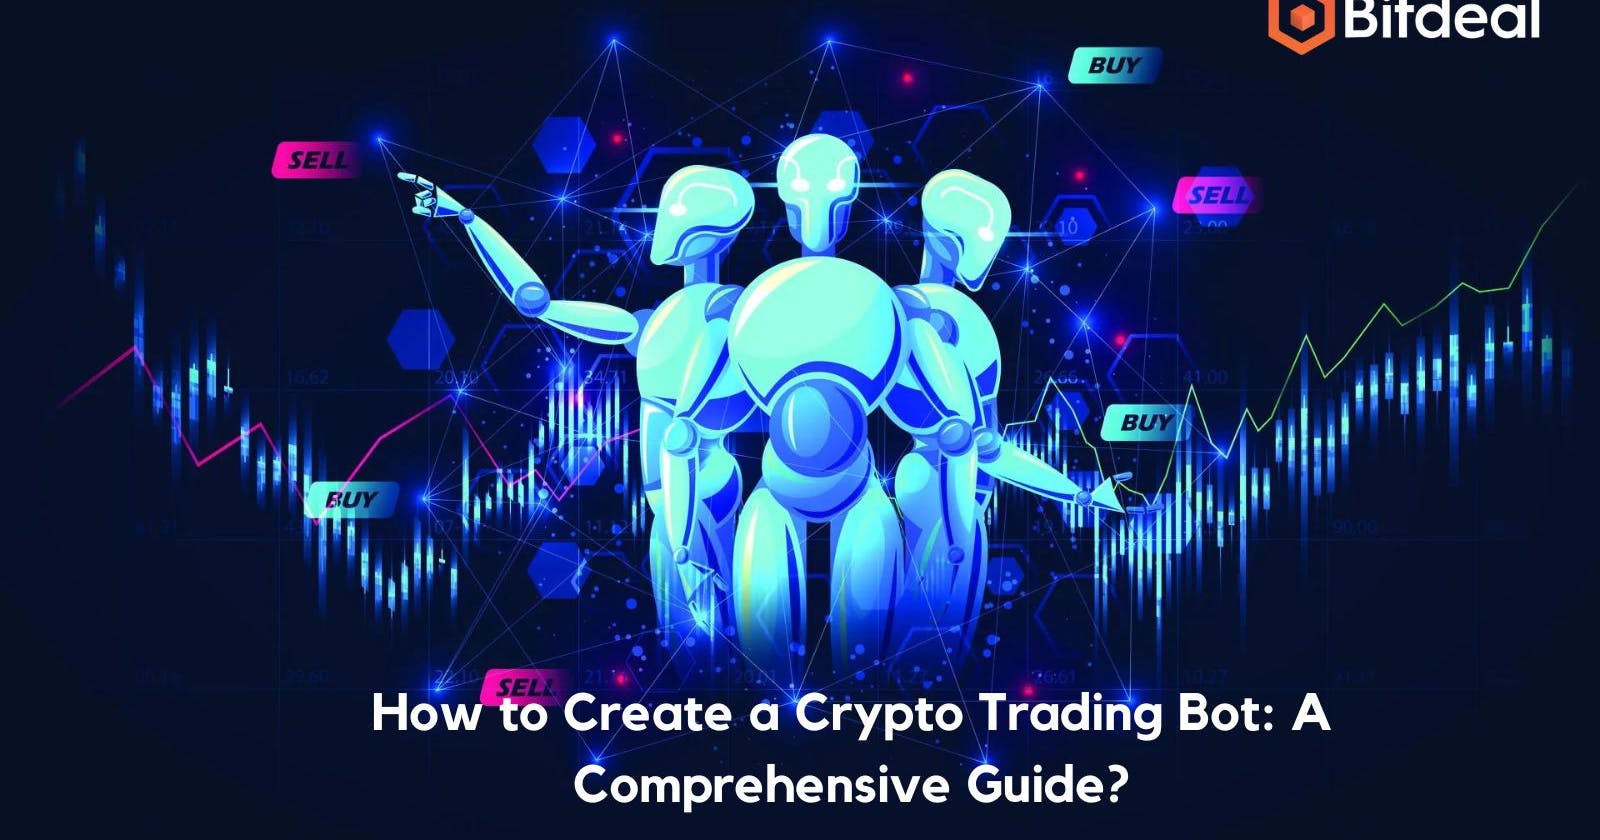 How to Create a Crypto Trading Bot: A Comprehensive Guide?